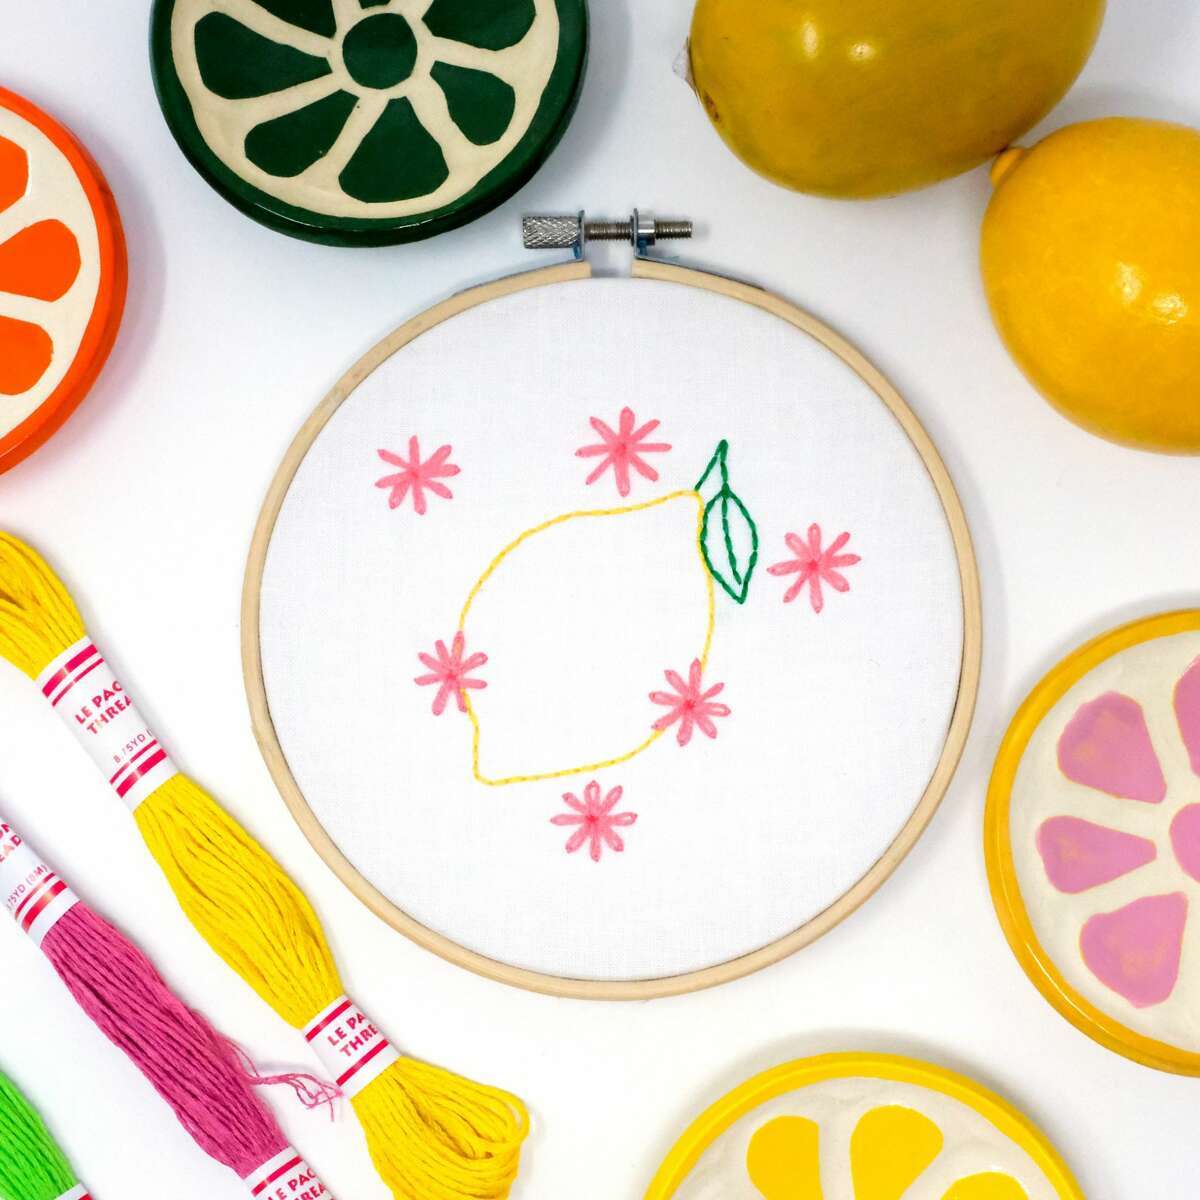 Jenny Lemons offers online craft classes, including one on how to embroider a lemon.